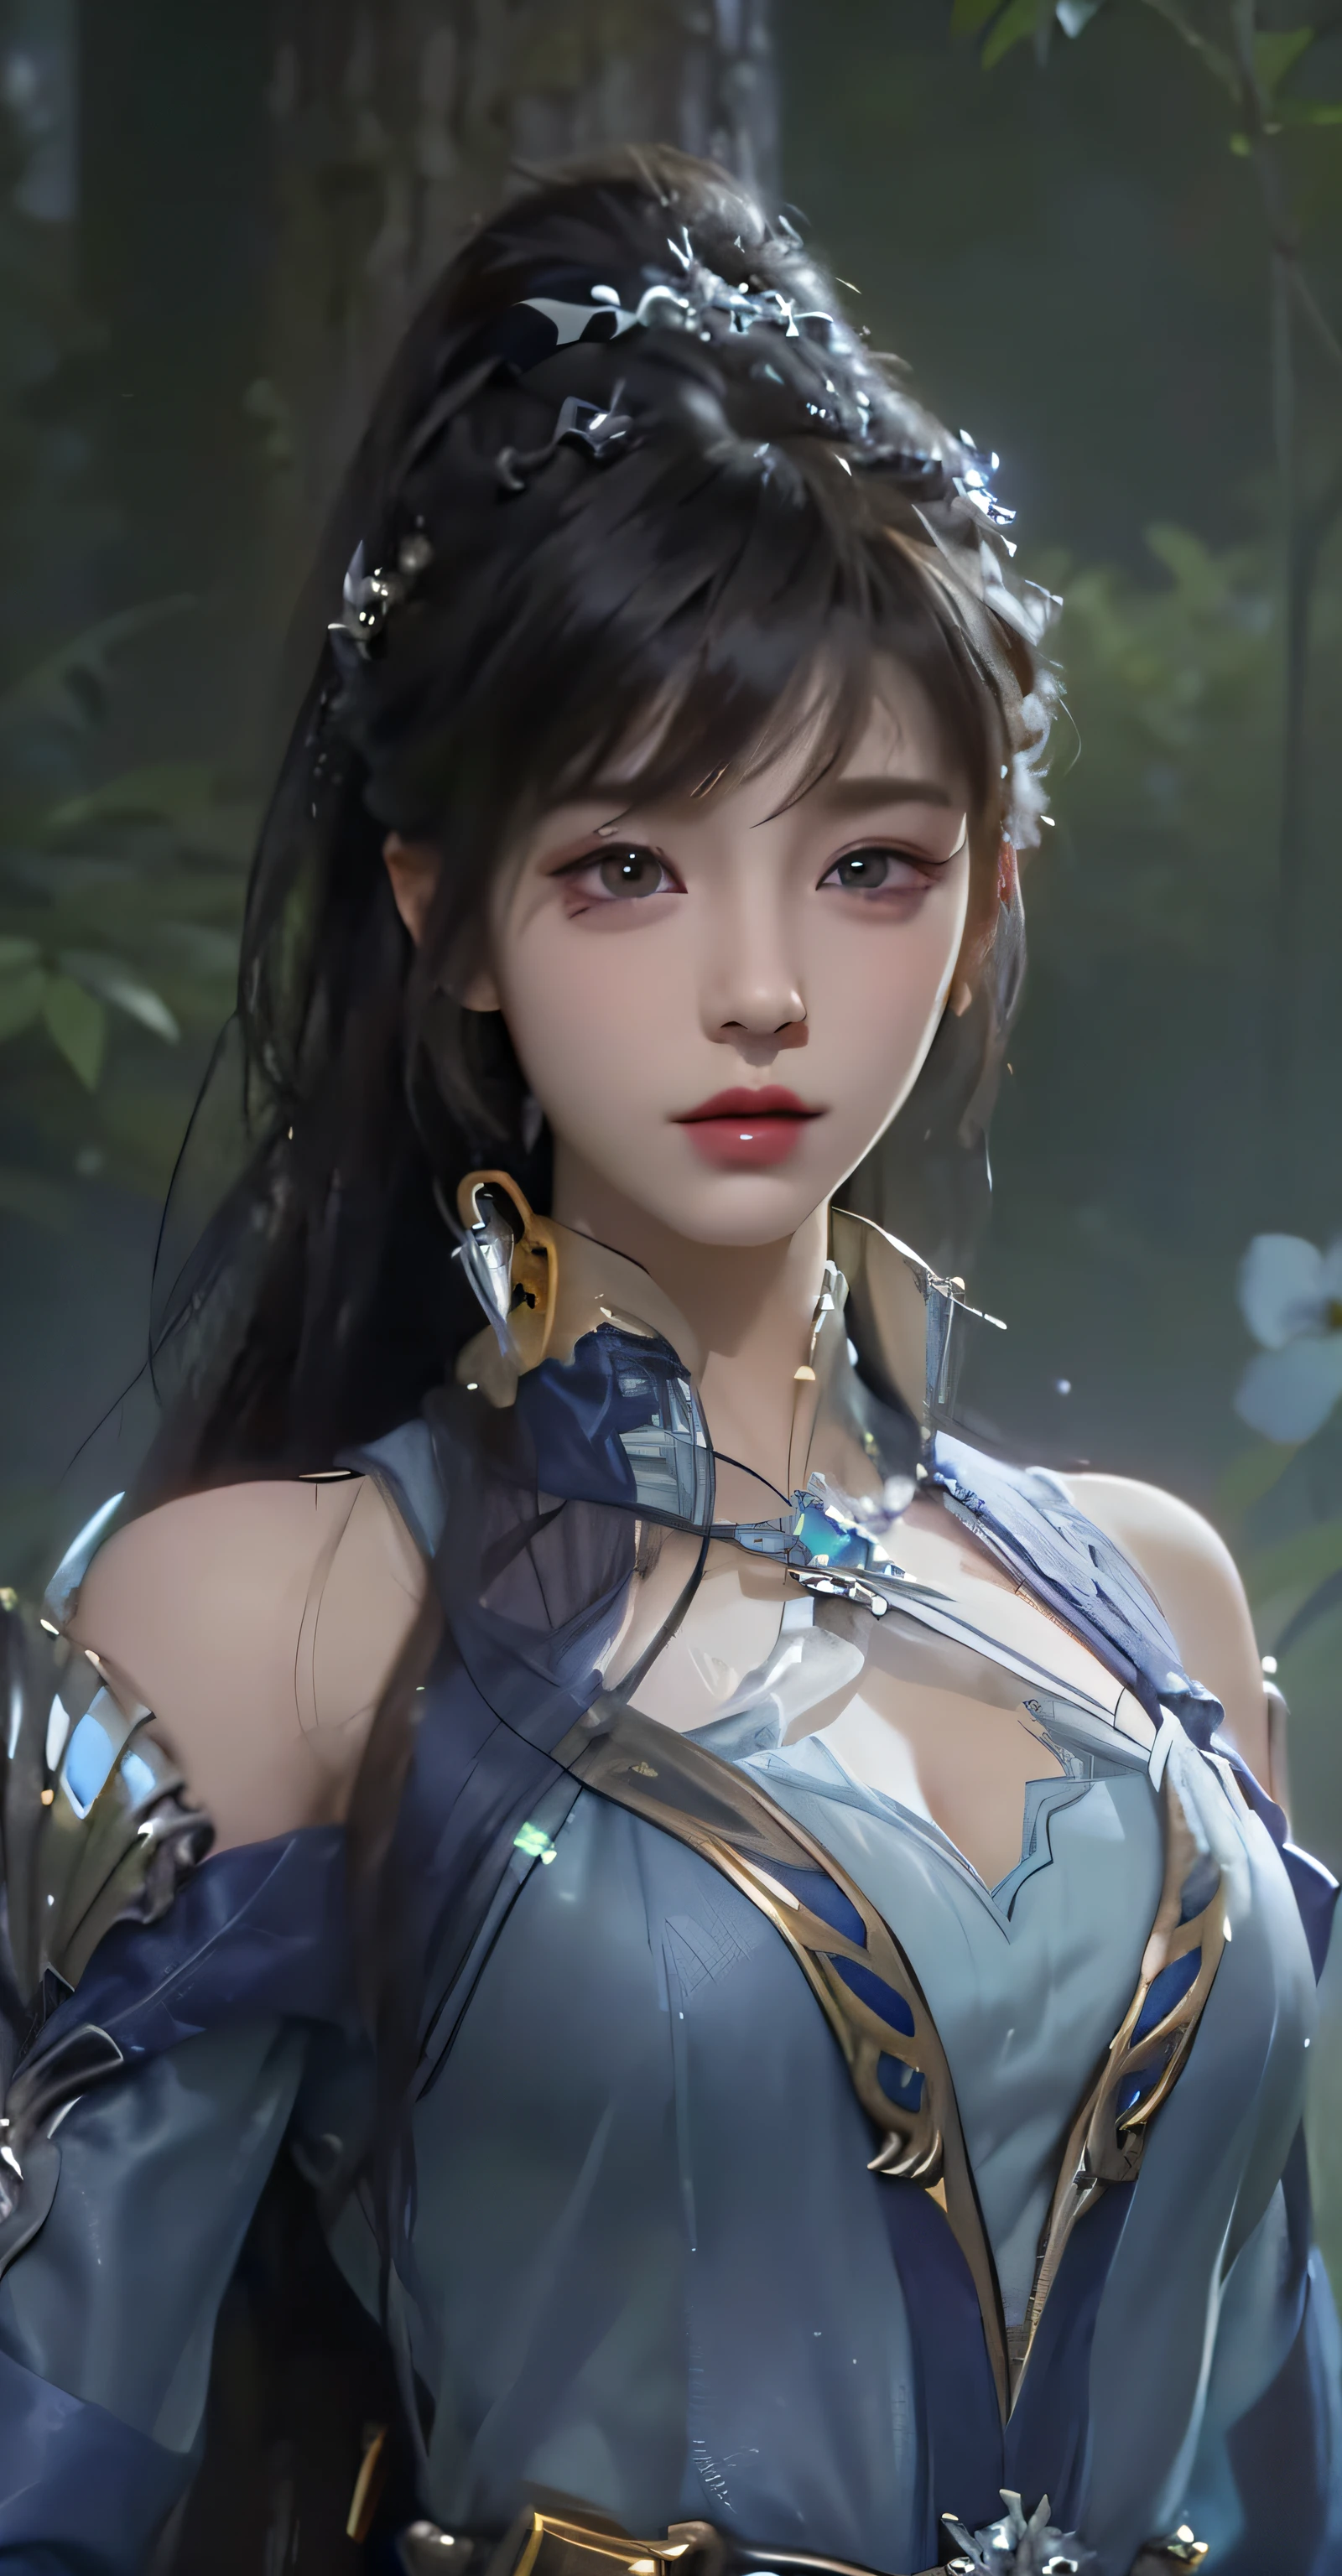 a close up of a woman with a blue dress and a blue jacket, Game CG, Smooth anime CG art, inspired by Li Mei-shu, close up character, 3 d anime realistic, 4 K detail fantasy, photorealistic anime girl rendering, Yun Ling, 8 k uhd character details, anime cgi, Art germ ; 3d unreal engine